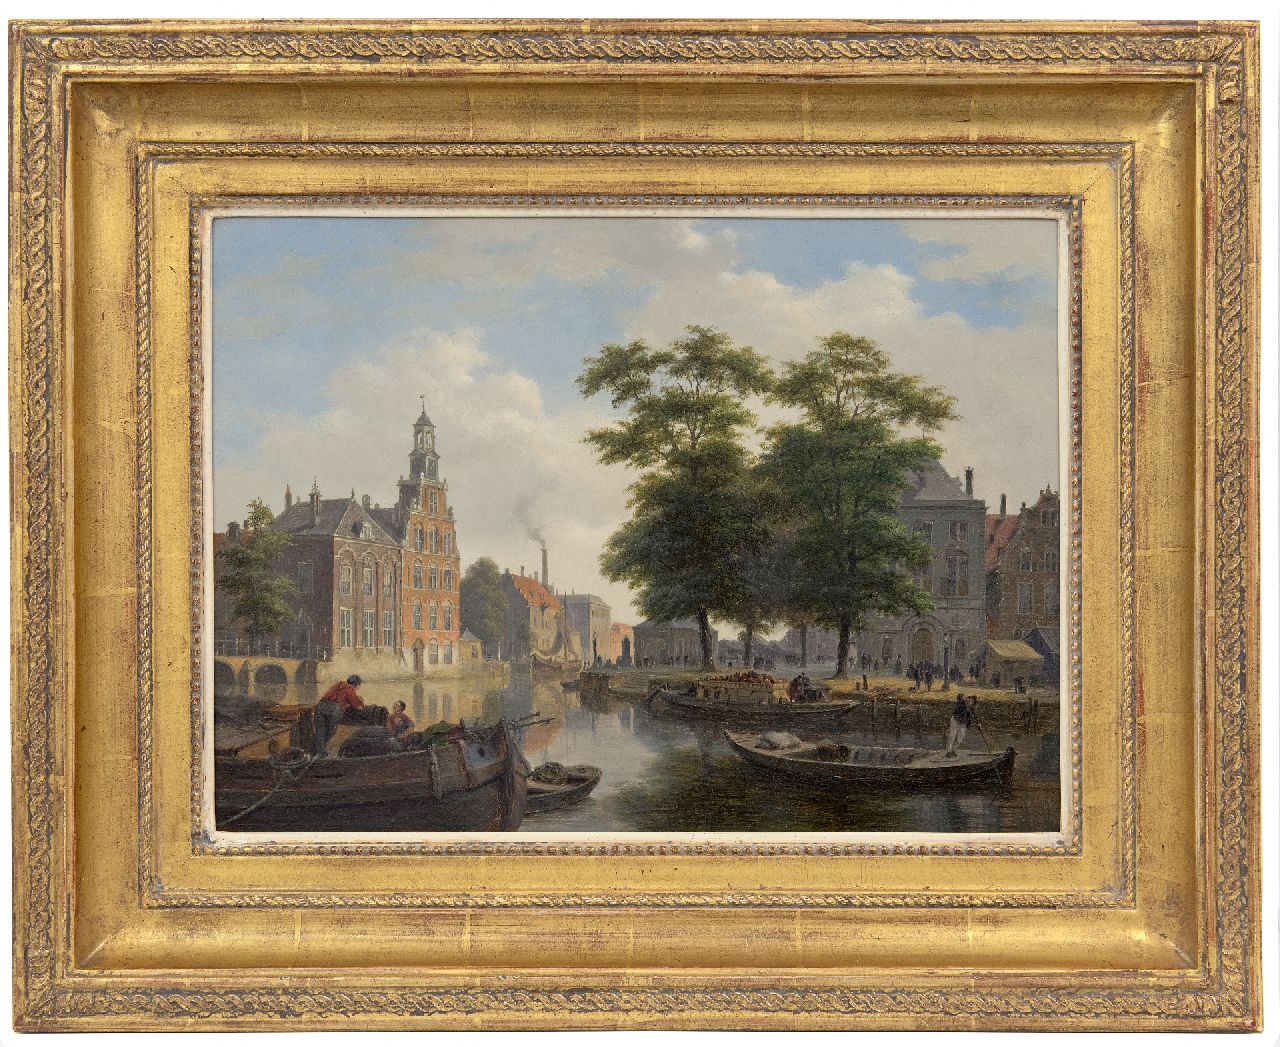 Hove B.J. van | Bartholomeus Johannes 'Bart' van Hove | Paintings offered for sale | A view of a town with townsfolk and shipping on a canal (pendant of A quay and town gate in winter), oil on panel 28.4 x 39.0 cm, signed l.l.